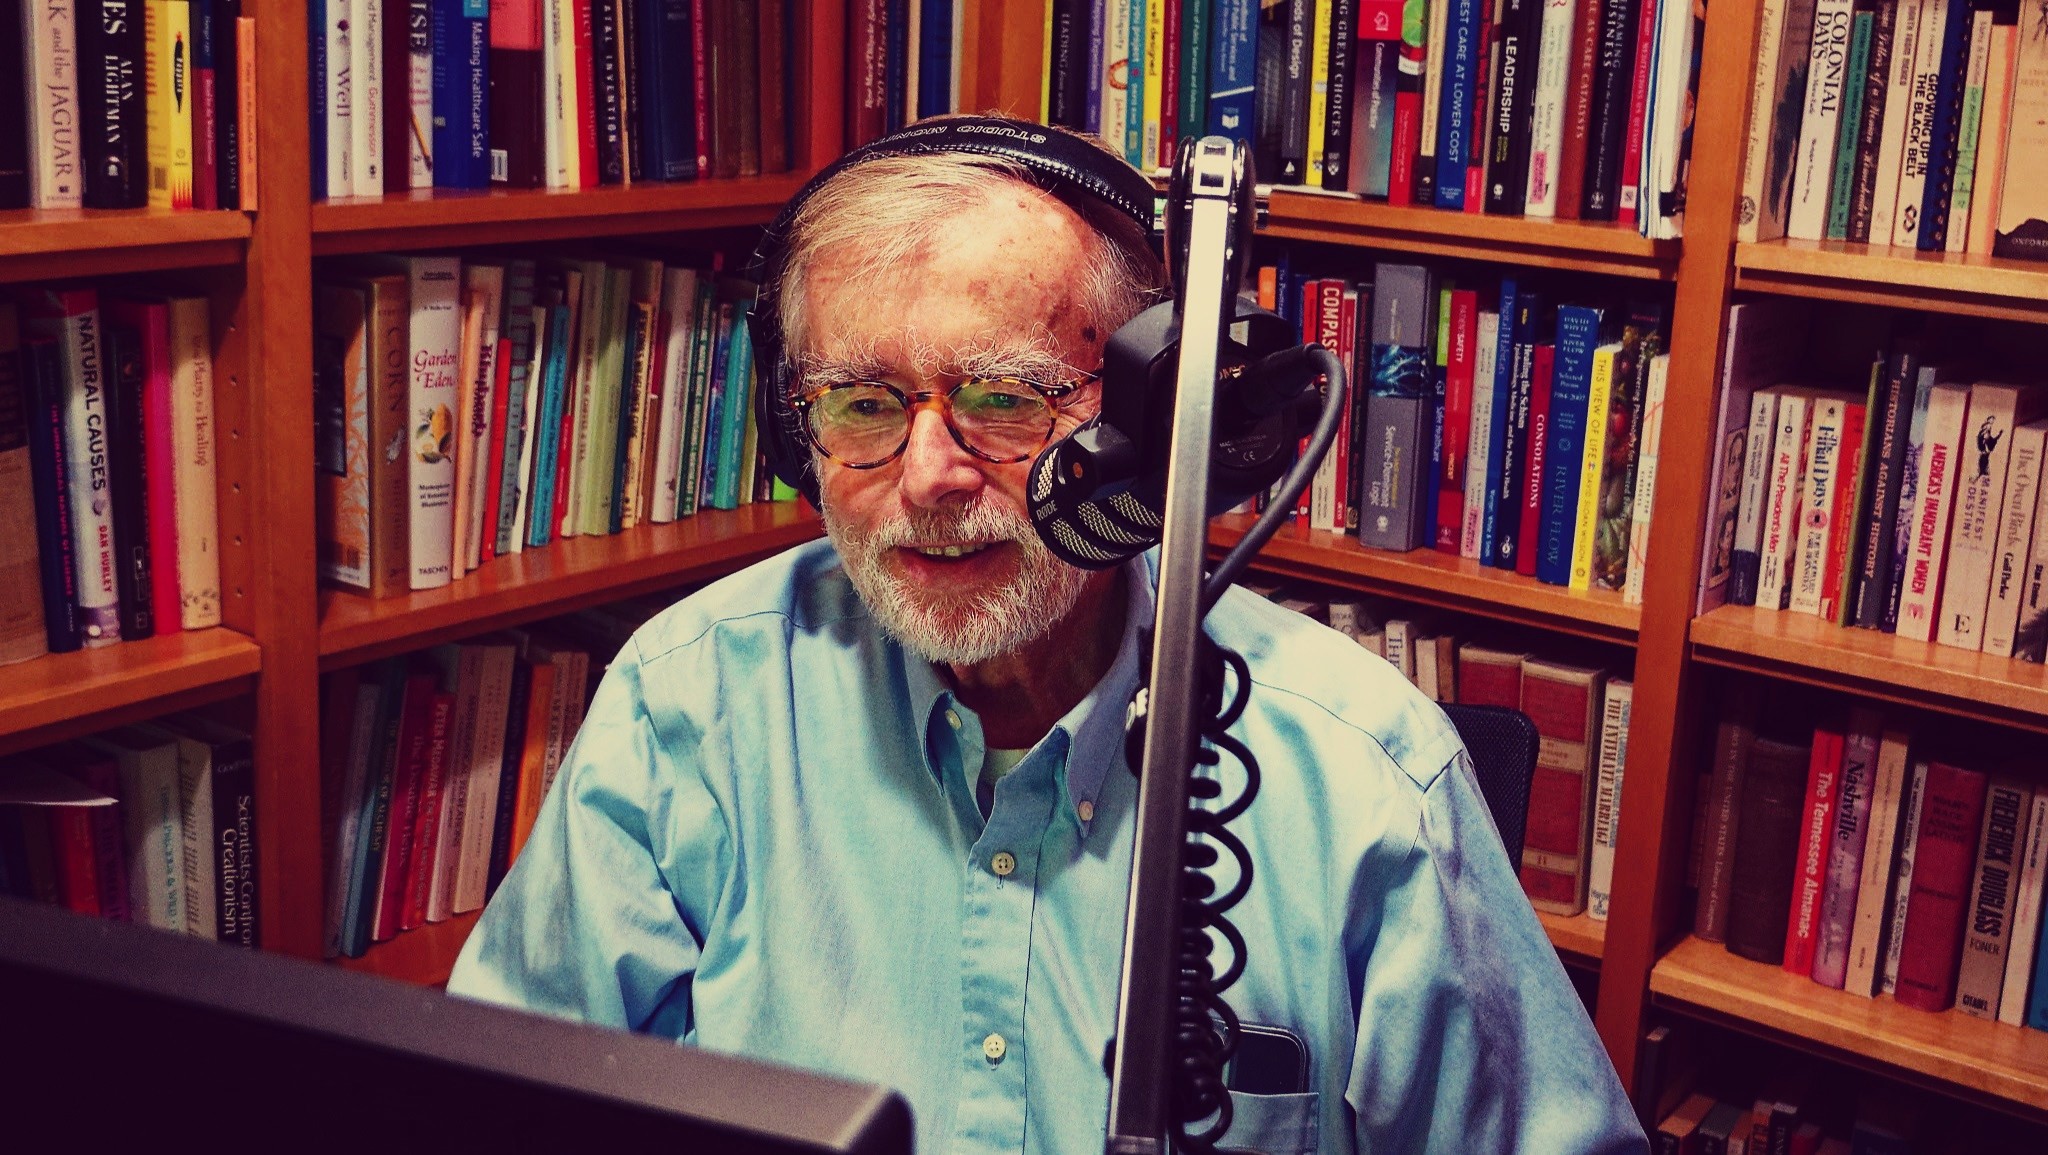 Paul Batalden smiling and sitting in front of a computer in his library, wearing headphones and speaking into a microphone